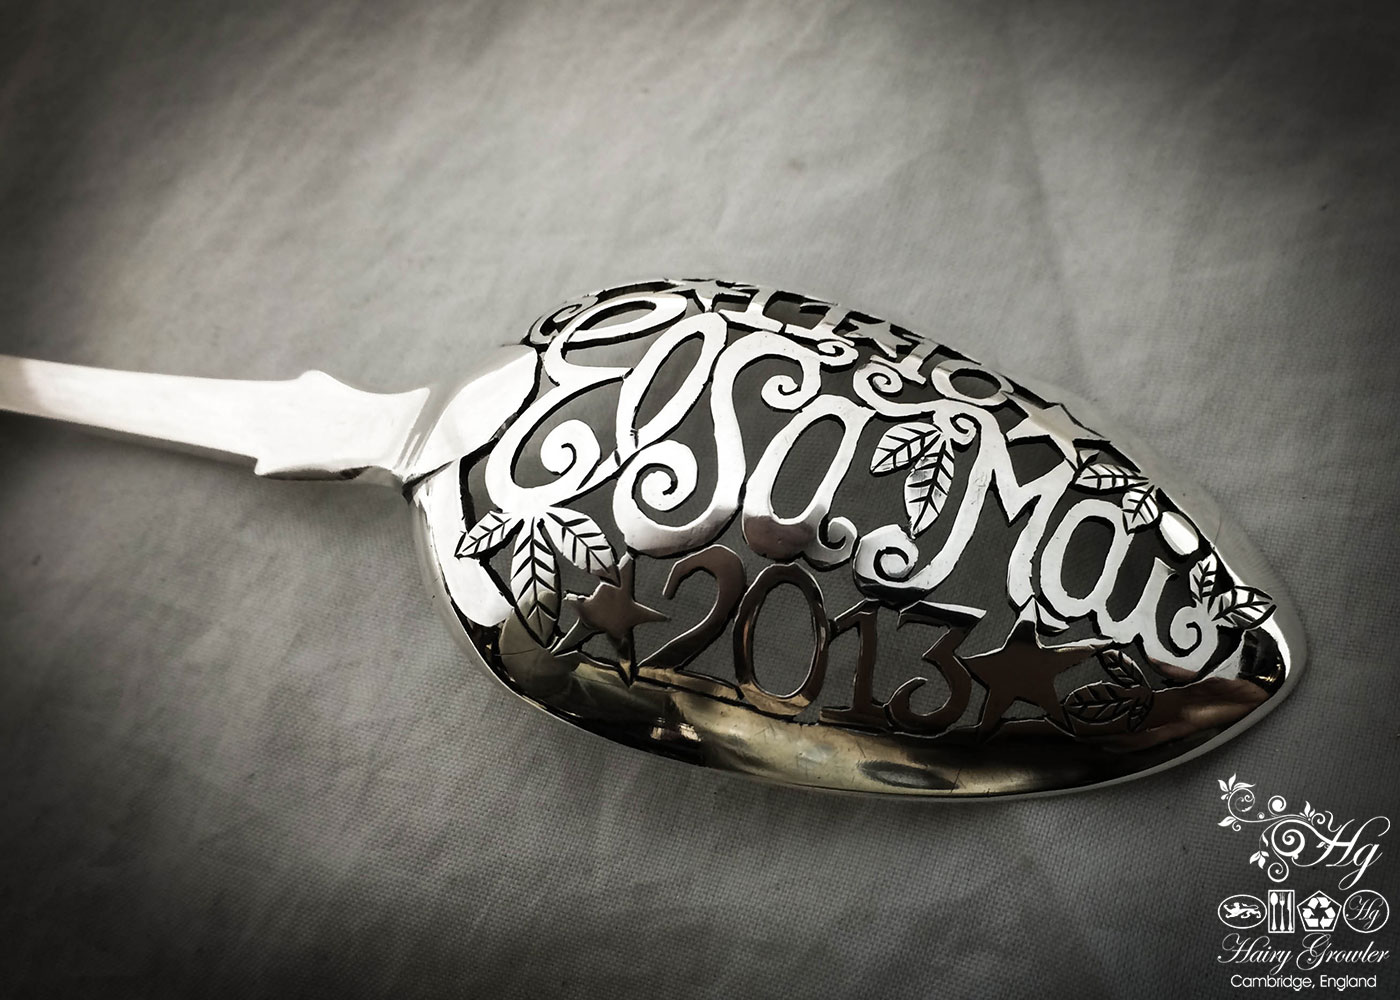 Individually commissioned and upcycled bespoke birth record christening naming ceremony spoon